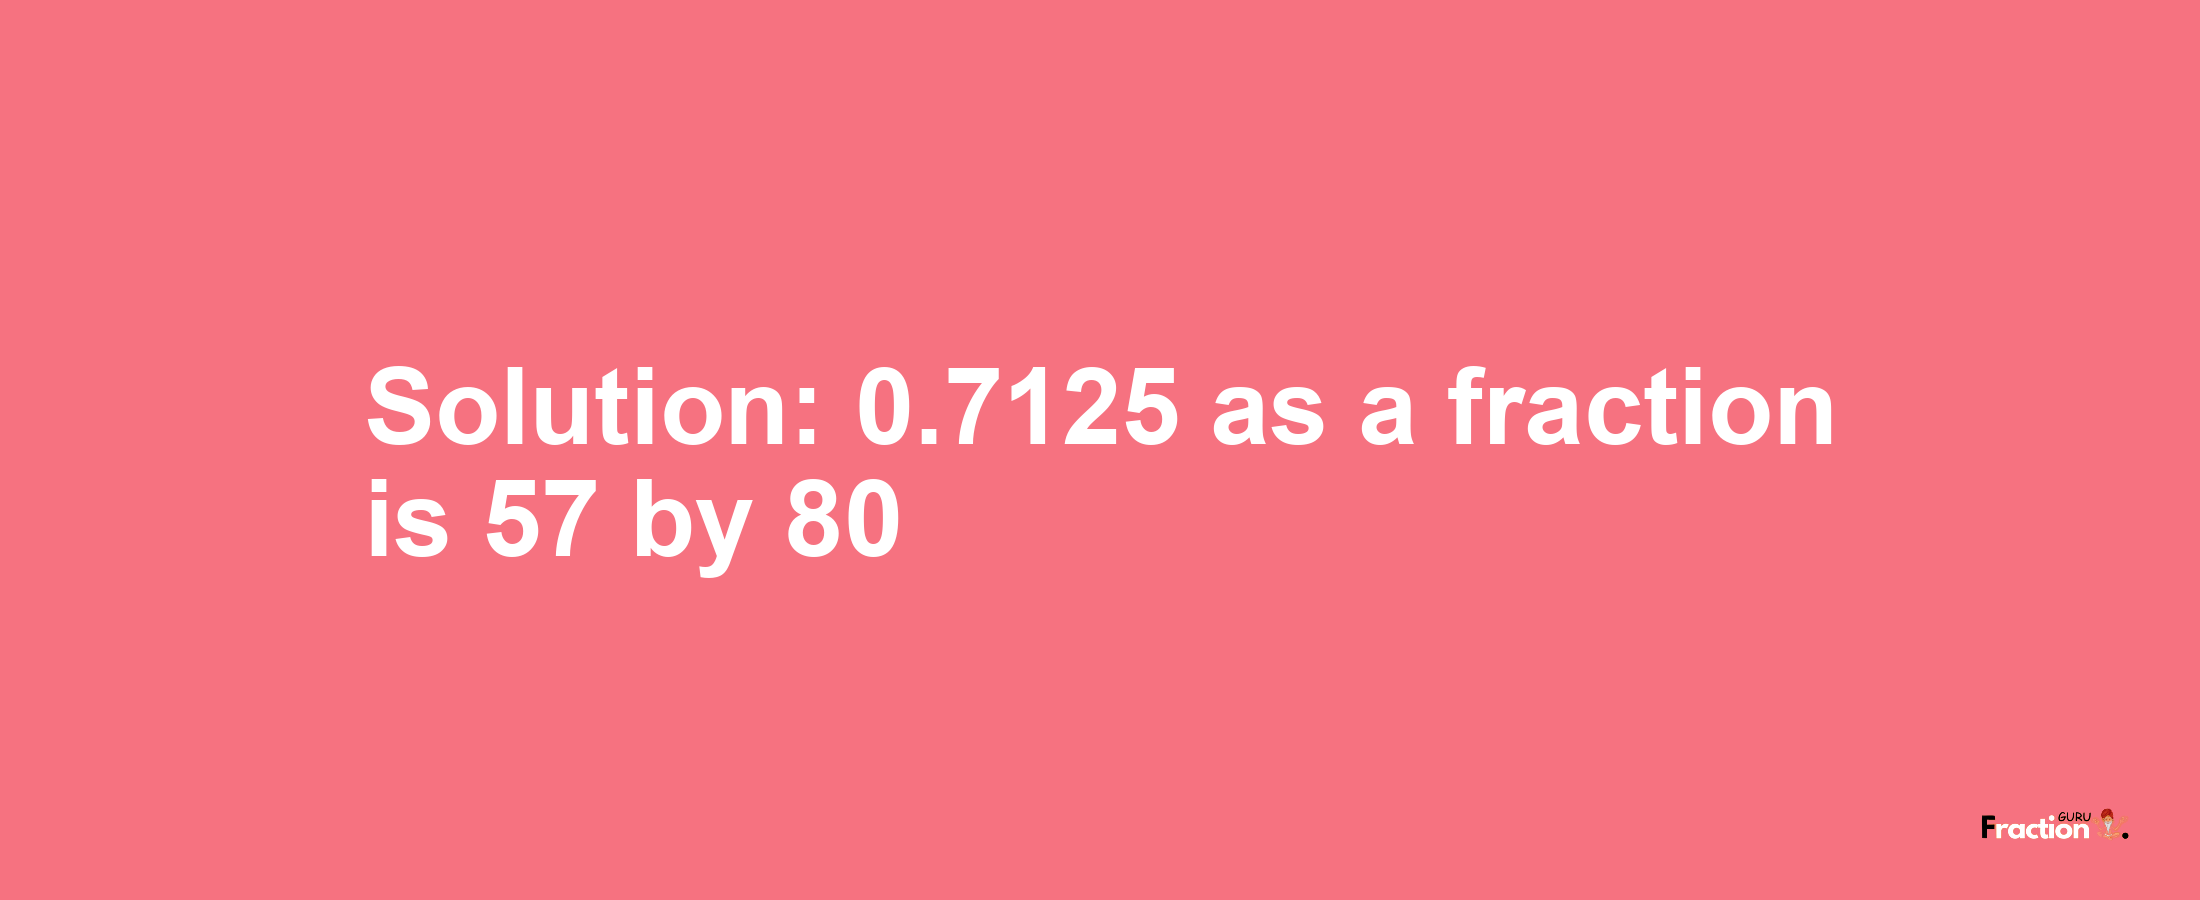 Solution:0.7125 as a fraction is 57/80